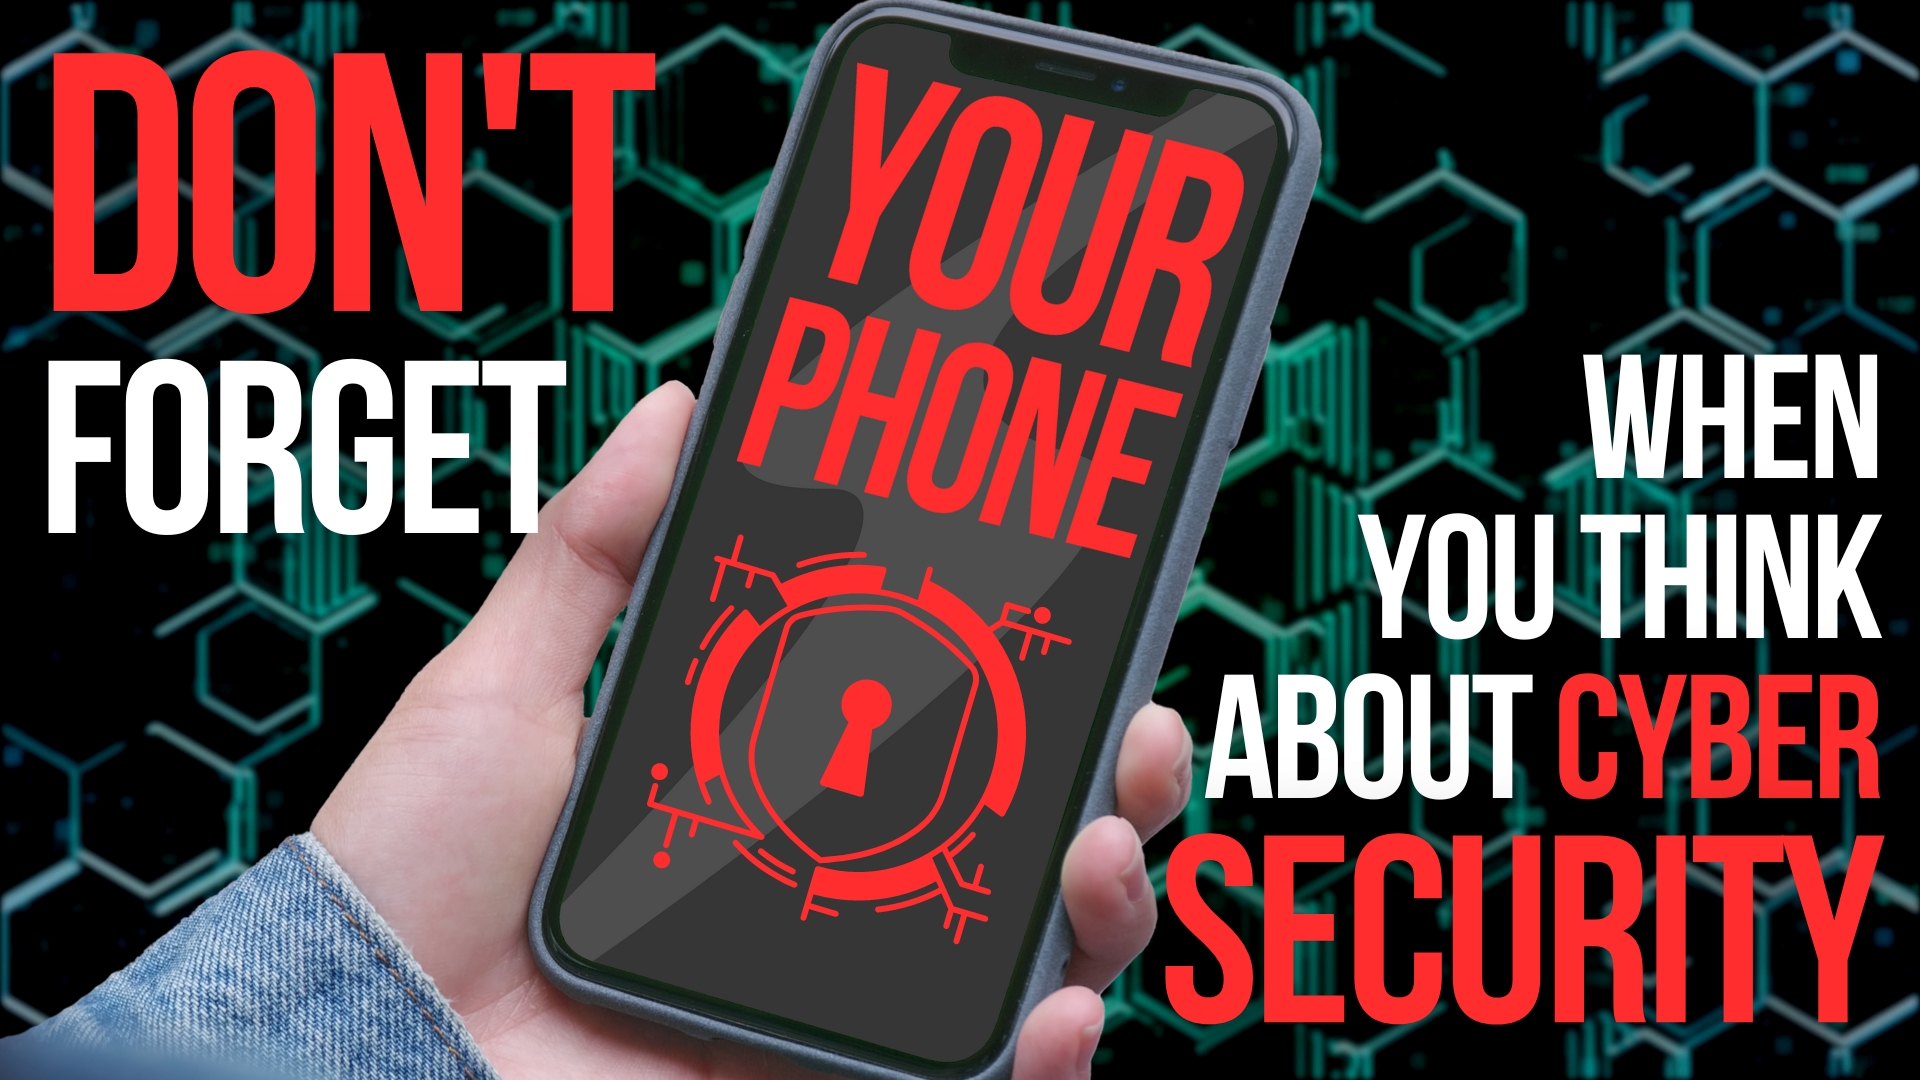 Mobile Phone Cybersecurity